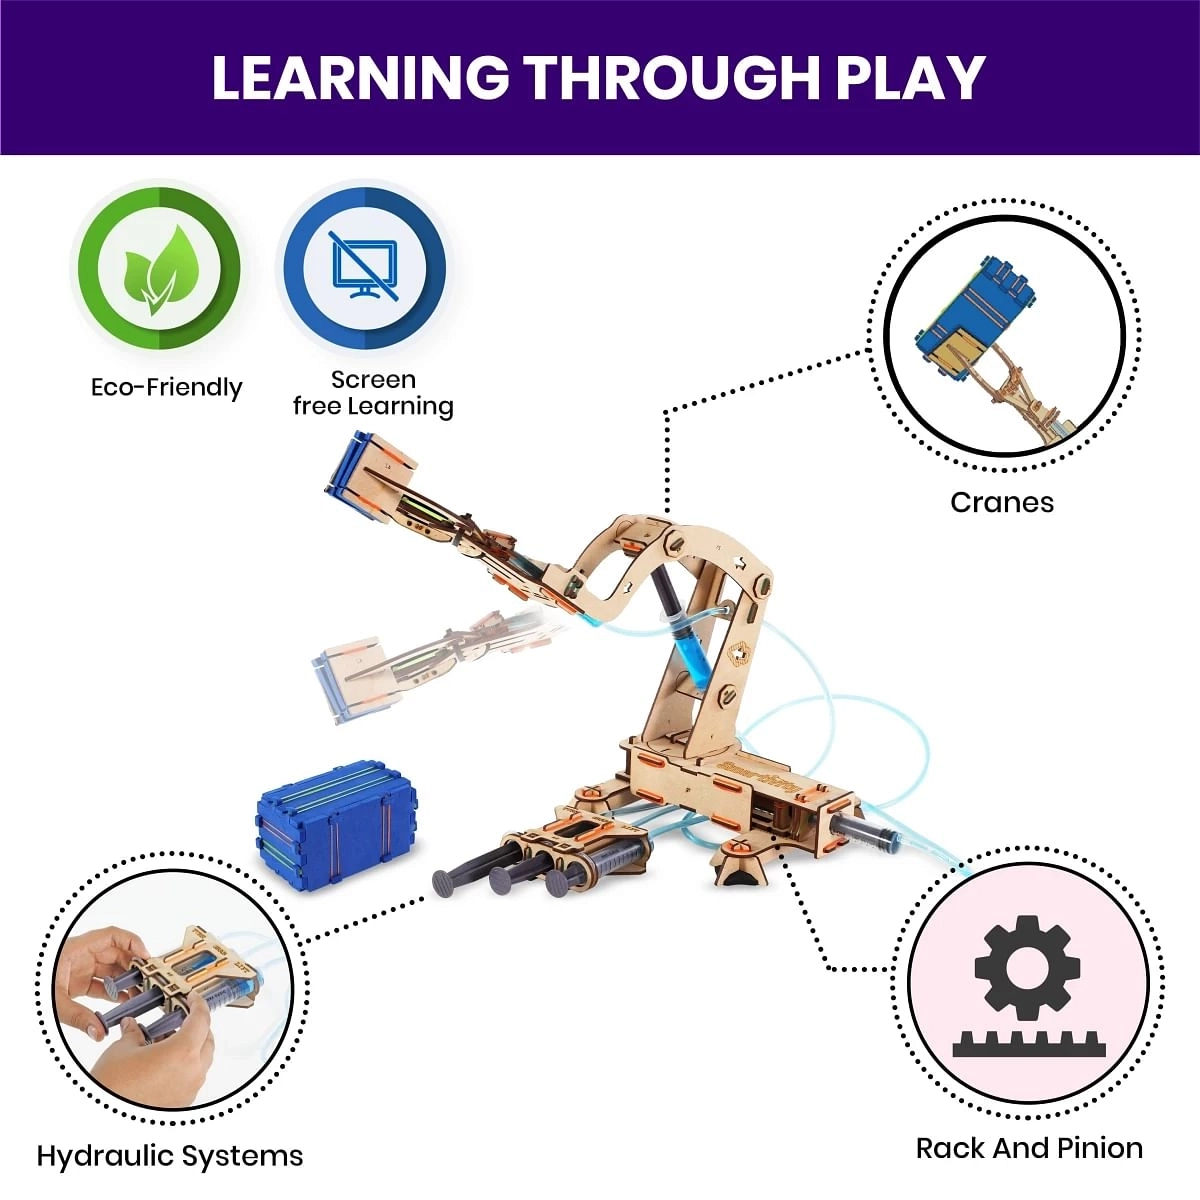 Smartivity Pump it Move it Hydraulic Crane STEM STEAM Educational DIY Building Construction Activity Toy Game Kit, Easy Instructions, Experiment, Play, Learn Science Engineering Project 8+